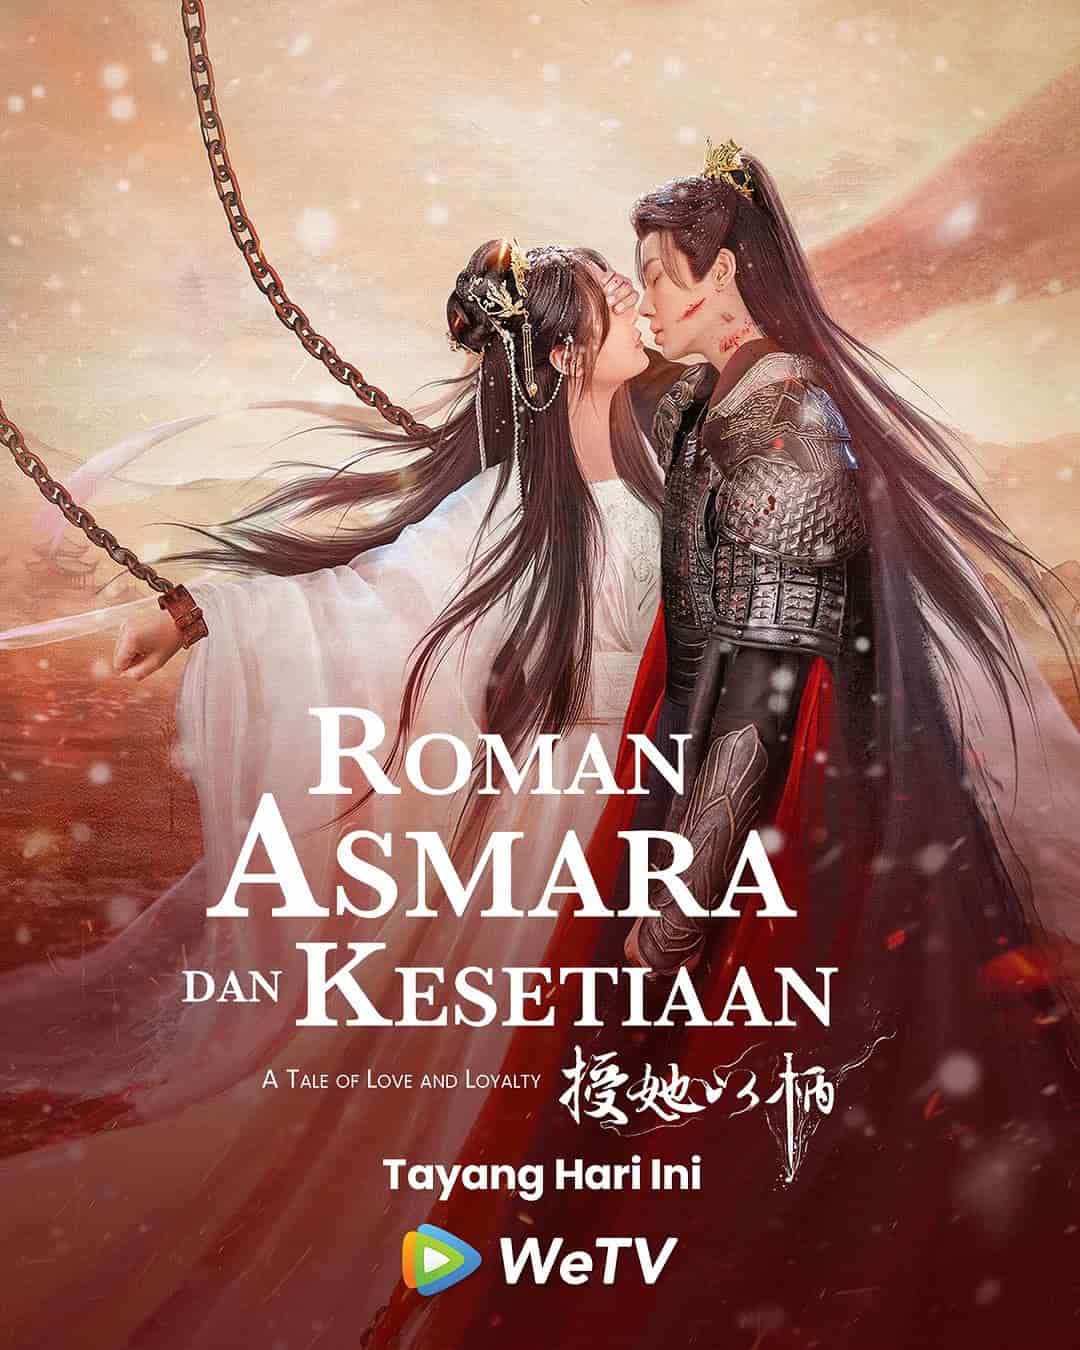 A Tale of Love and Loyalty - Sinopsis, Pemain, OST, Episode, Review